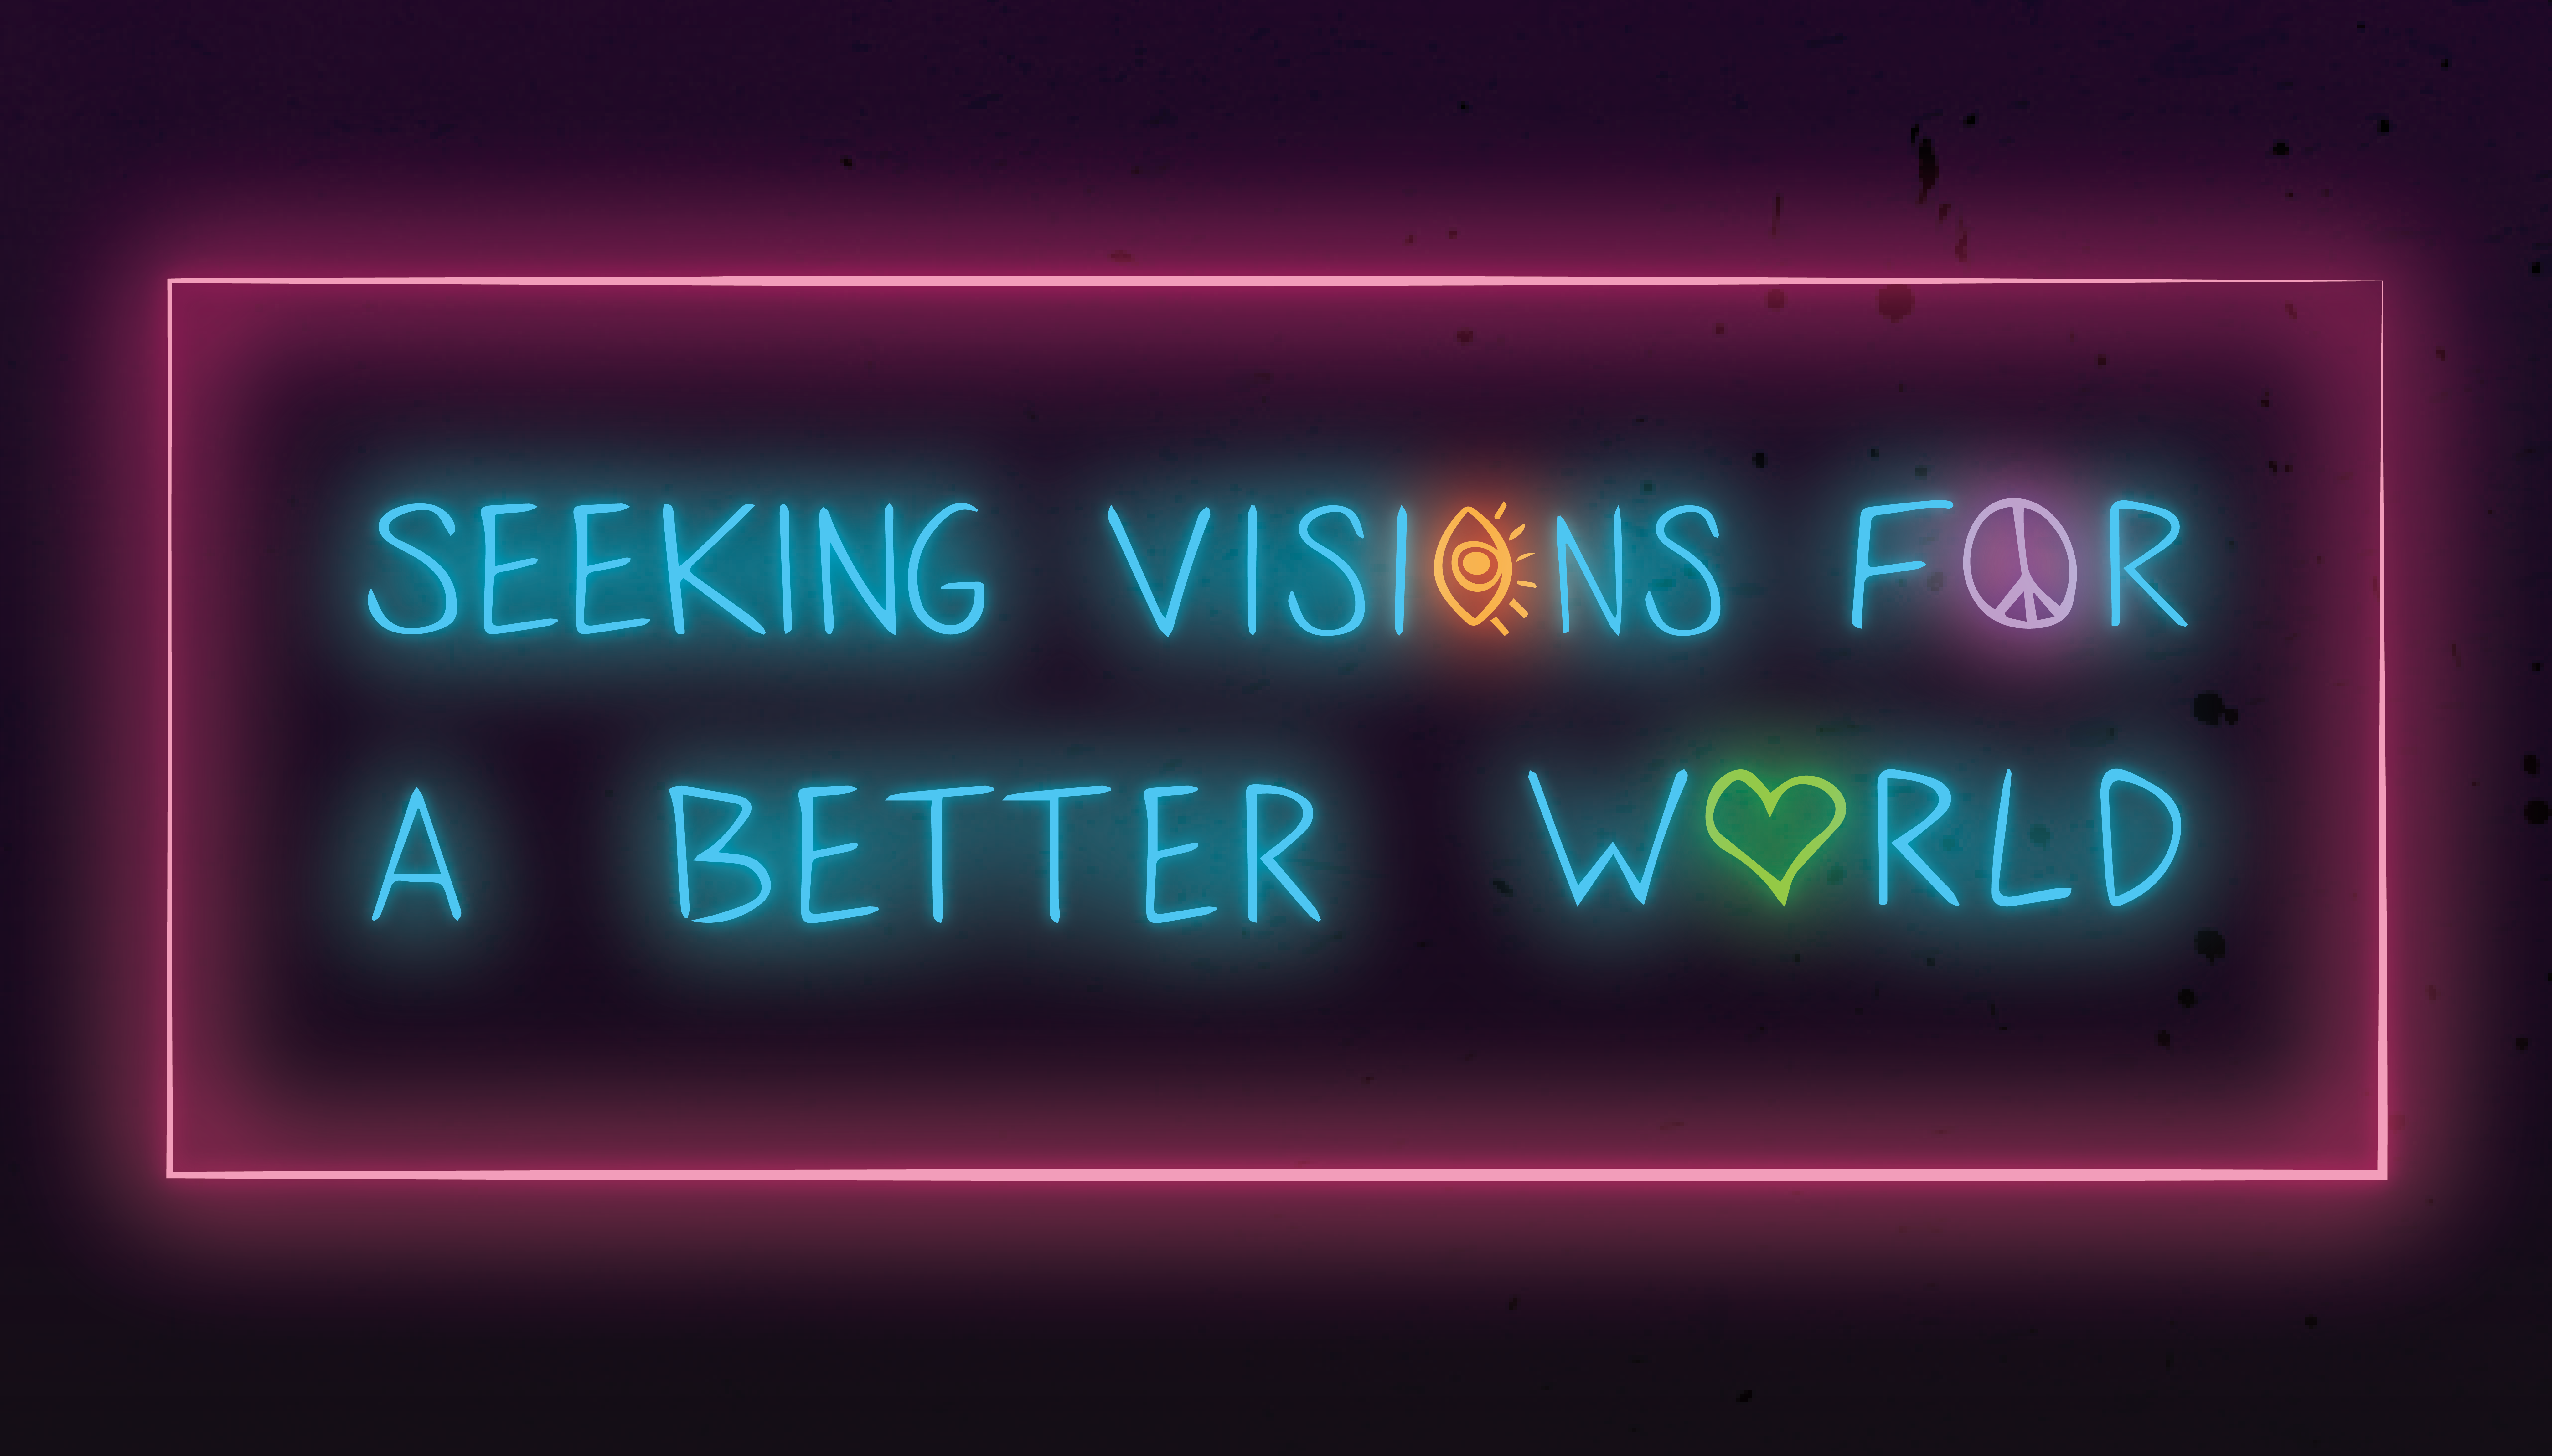 Banner with a neon-like image that says 